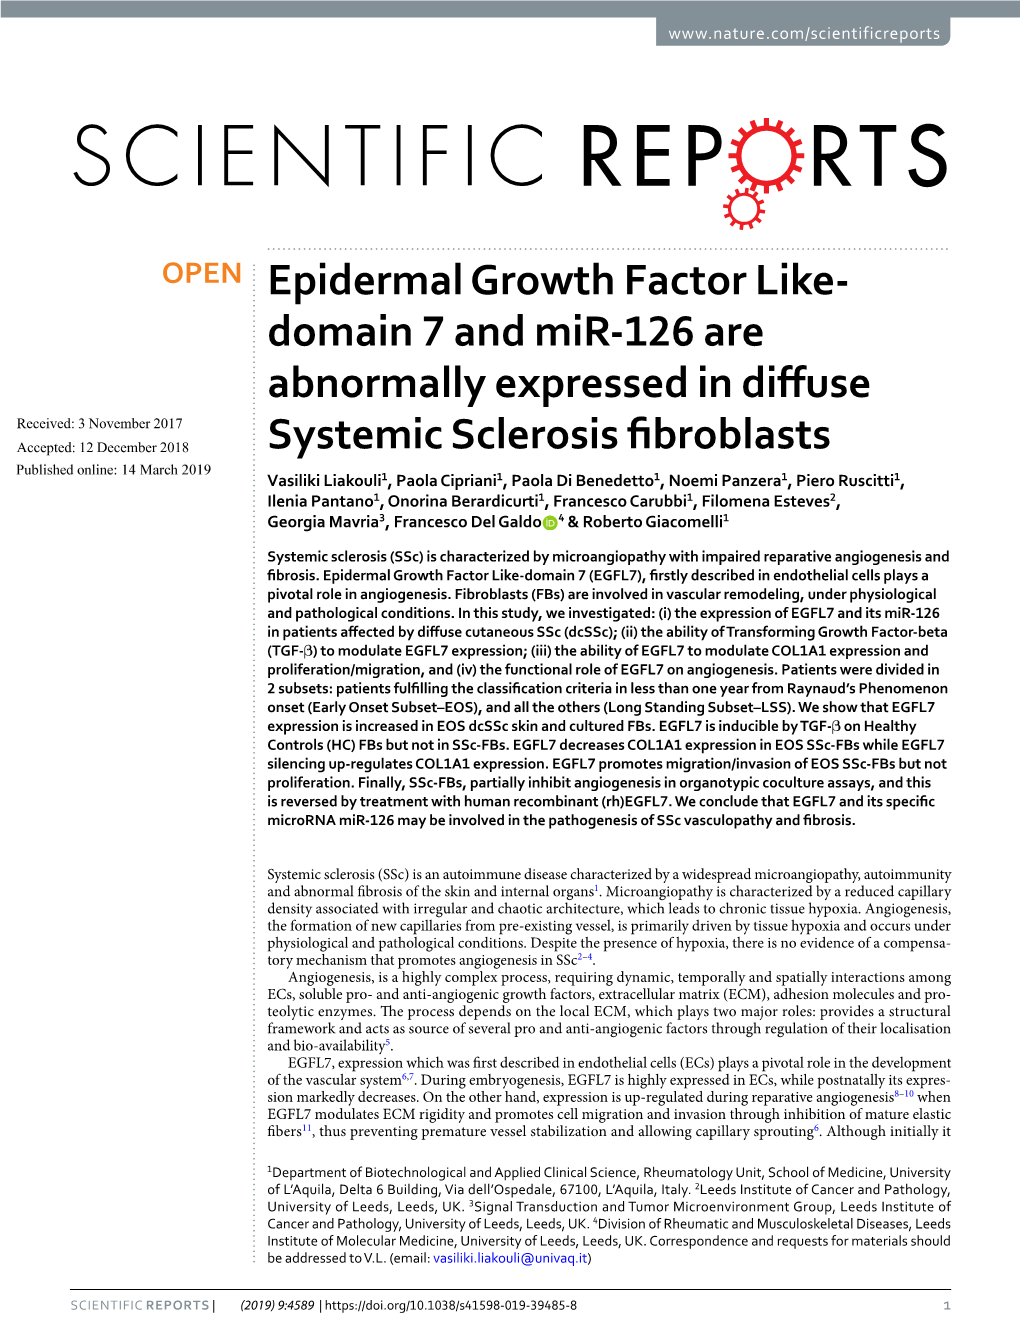 Epidermal Growth Factor Like-Domain 7 and Mir-126 Are Abnormally